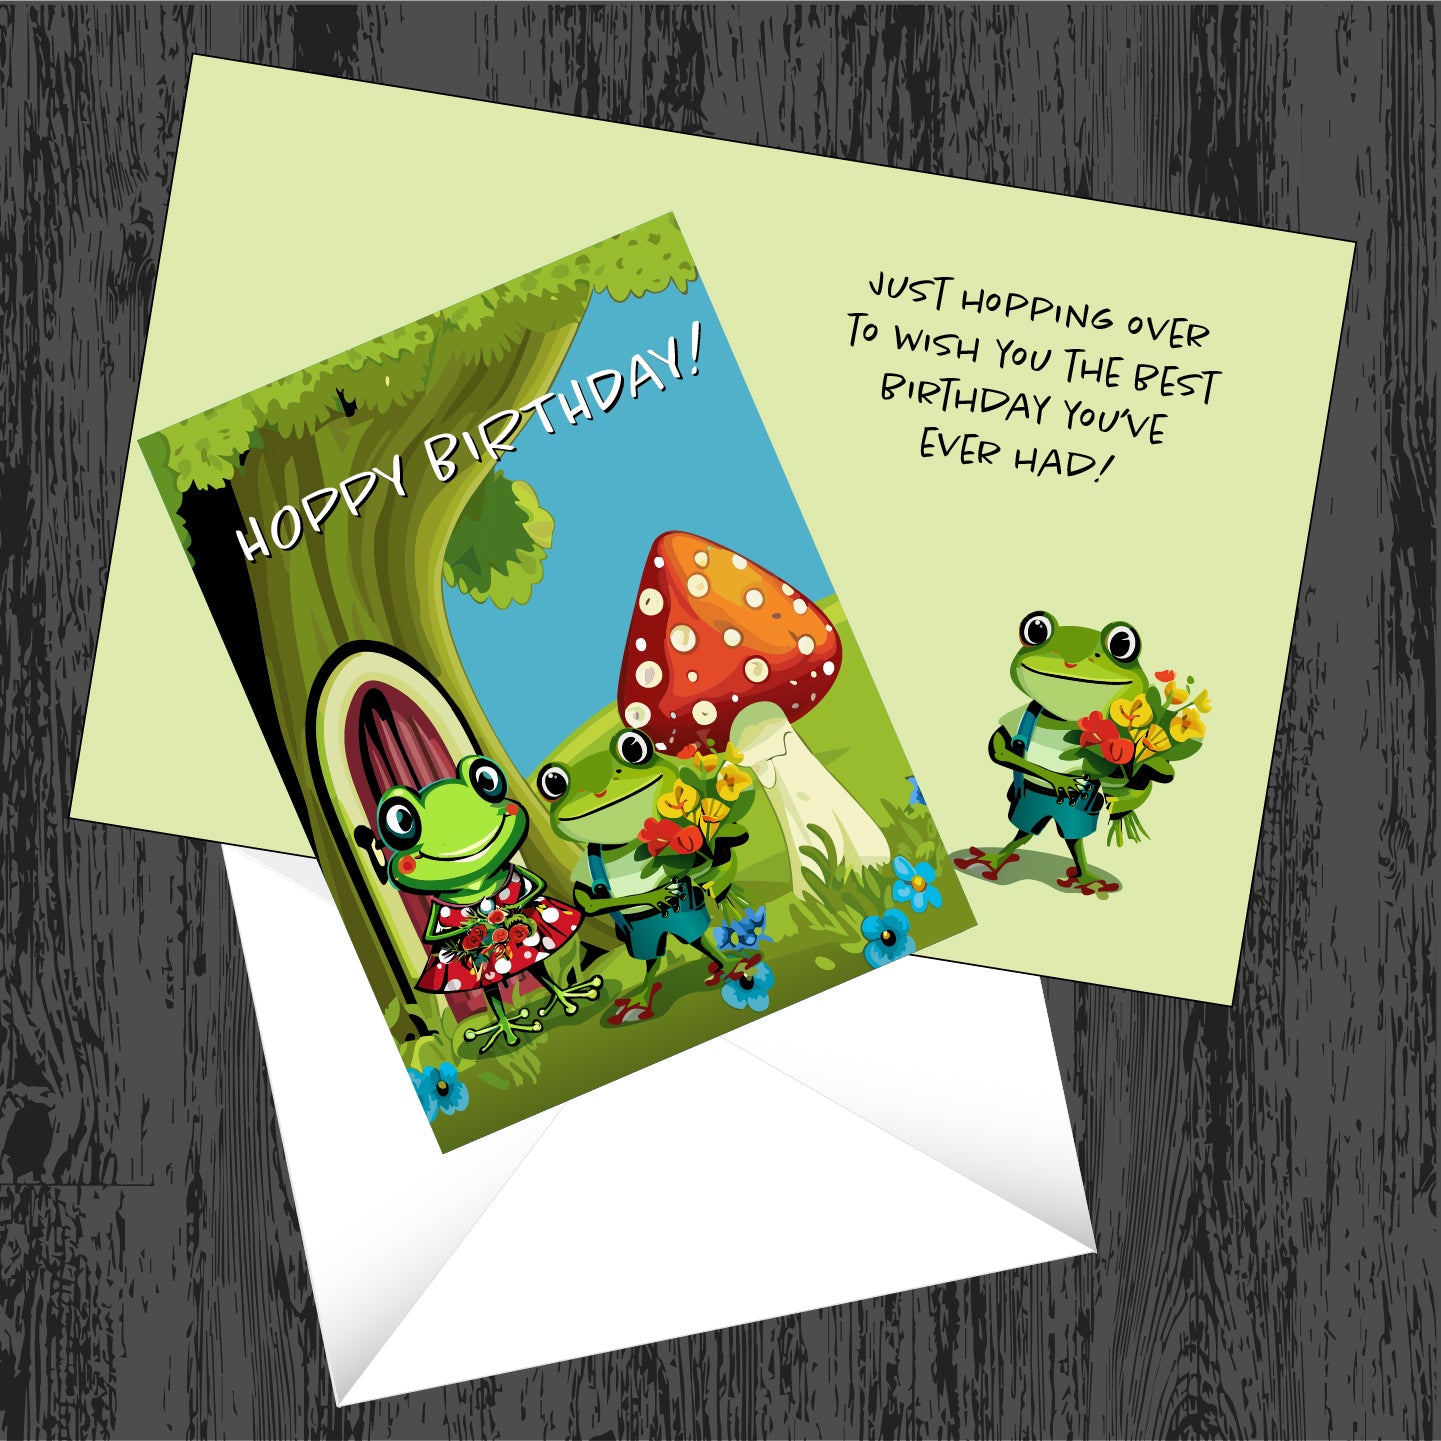 Frog Friend Birthday Card, 5.5"x4.25", envelope included, message text below